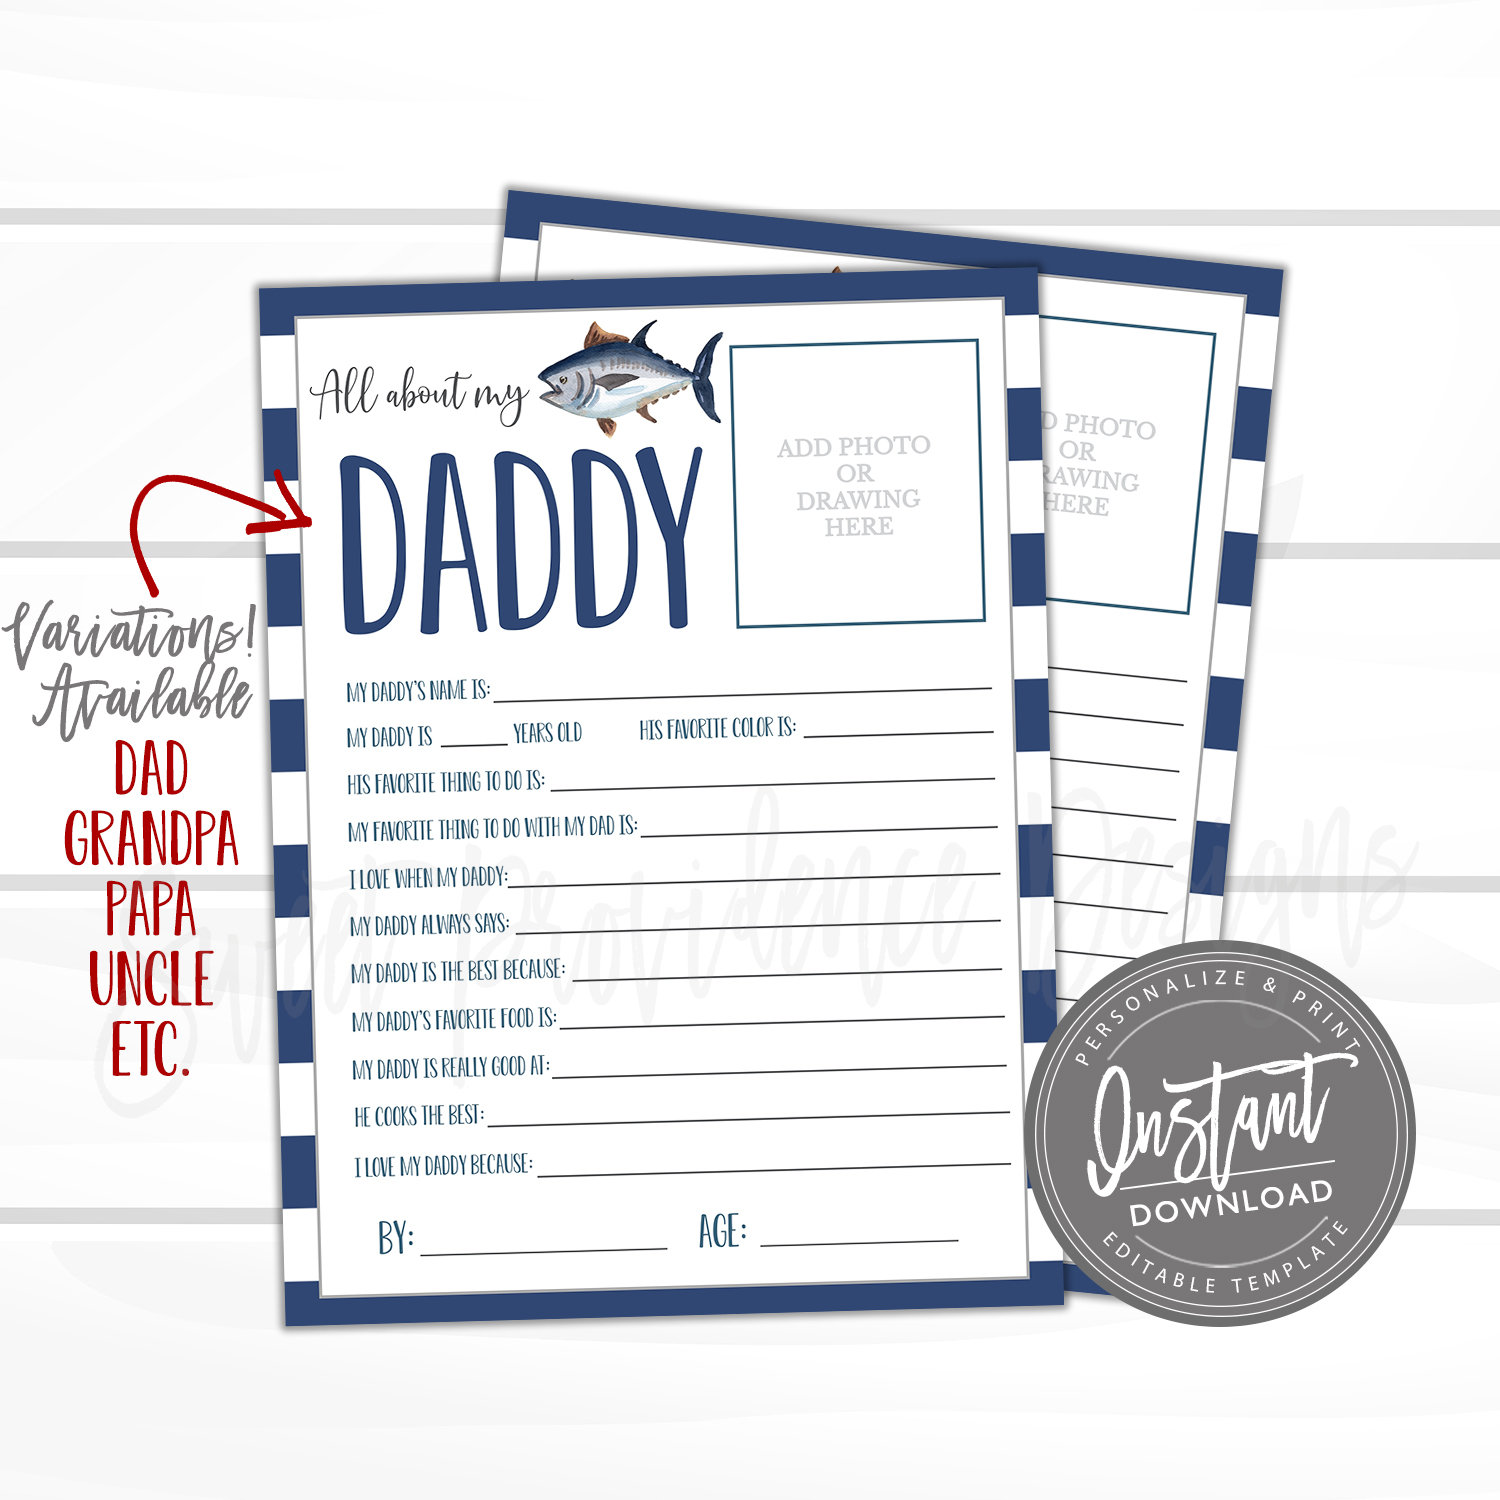 Download Fathers day questionnaire Survey, Father's Day Gift, All ...